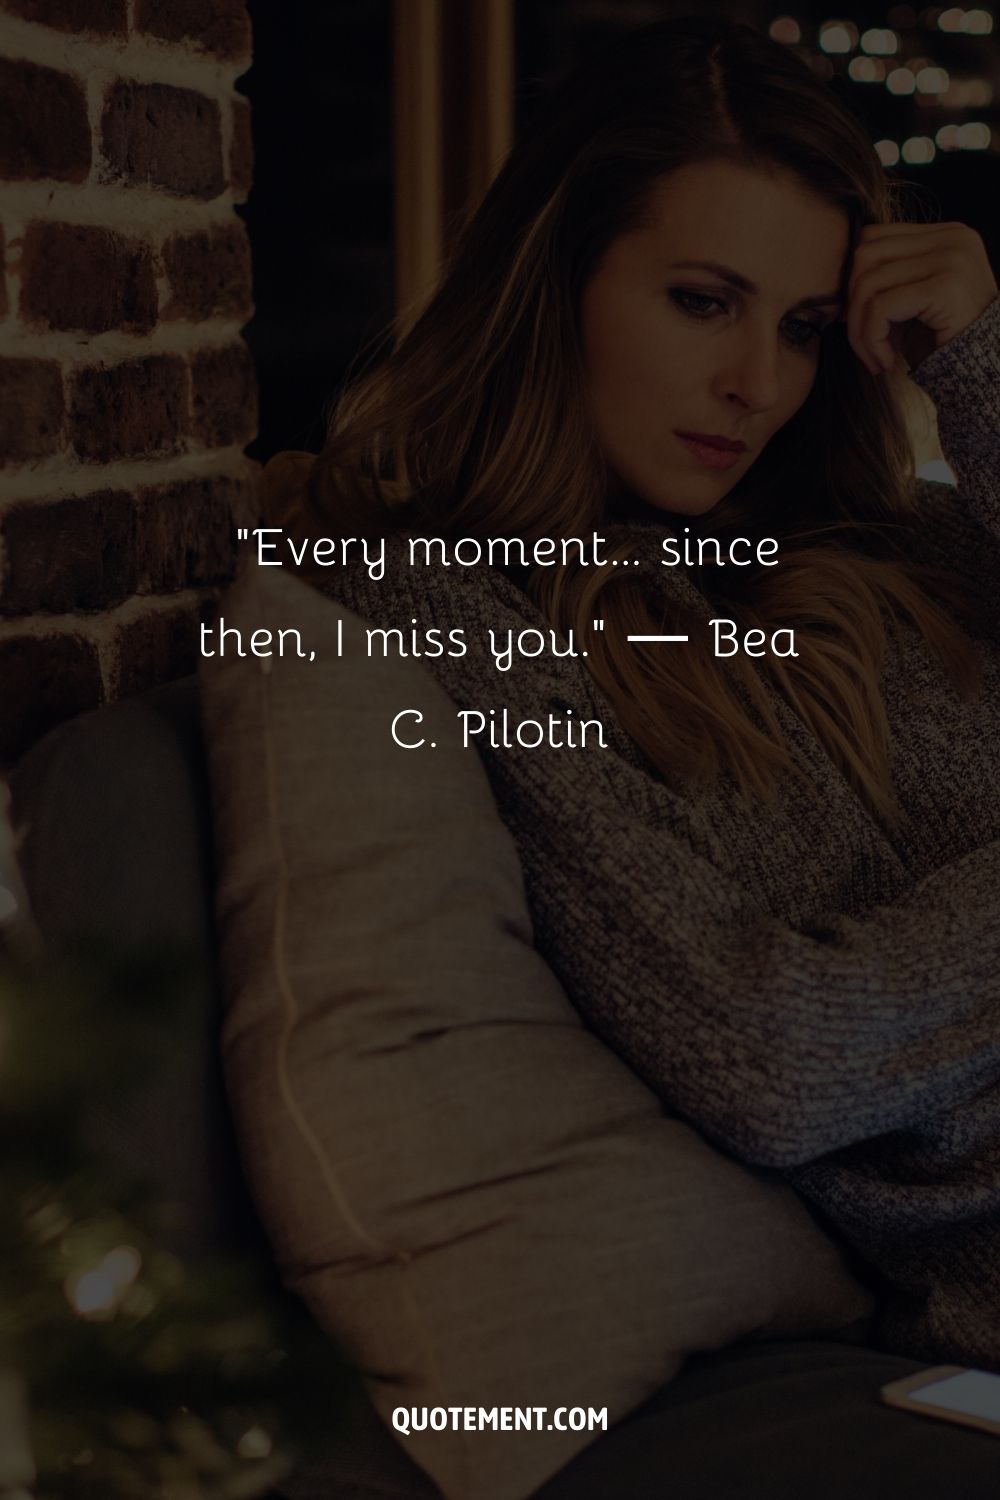 Every moment... since then, I miss you